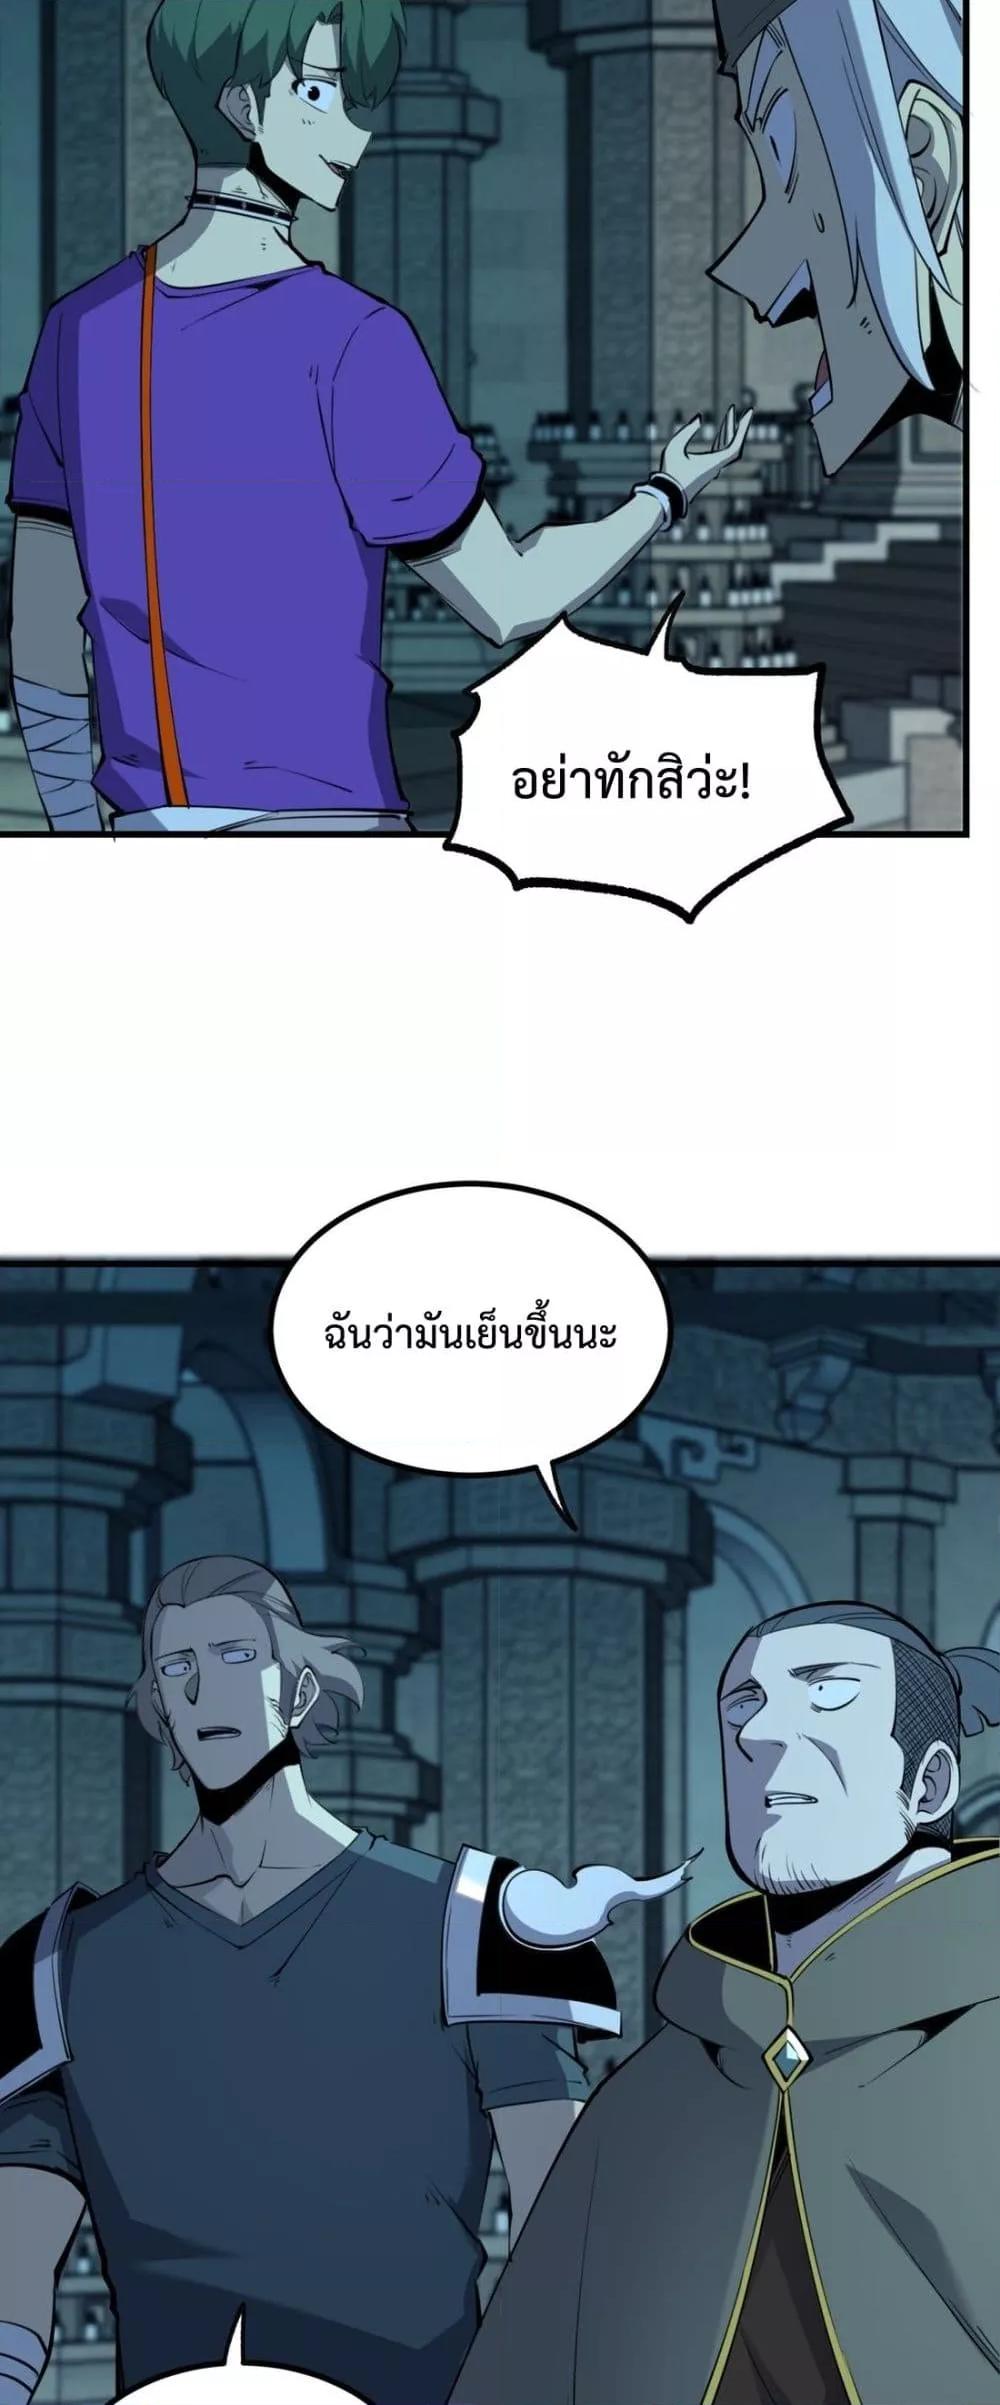 I Became The King by Scavenging โ€“ เนเธเนเธฅเน เน€เธฅเน€เธงเนเธฅเธฅเธฃเธดเนเธ เธ•เธญเธเธ—เธตเน 12 (18)